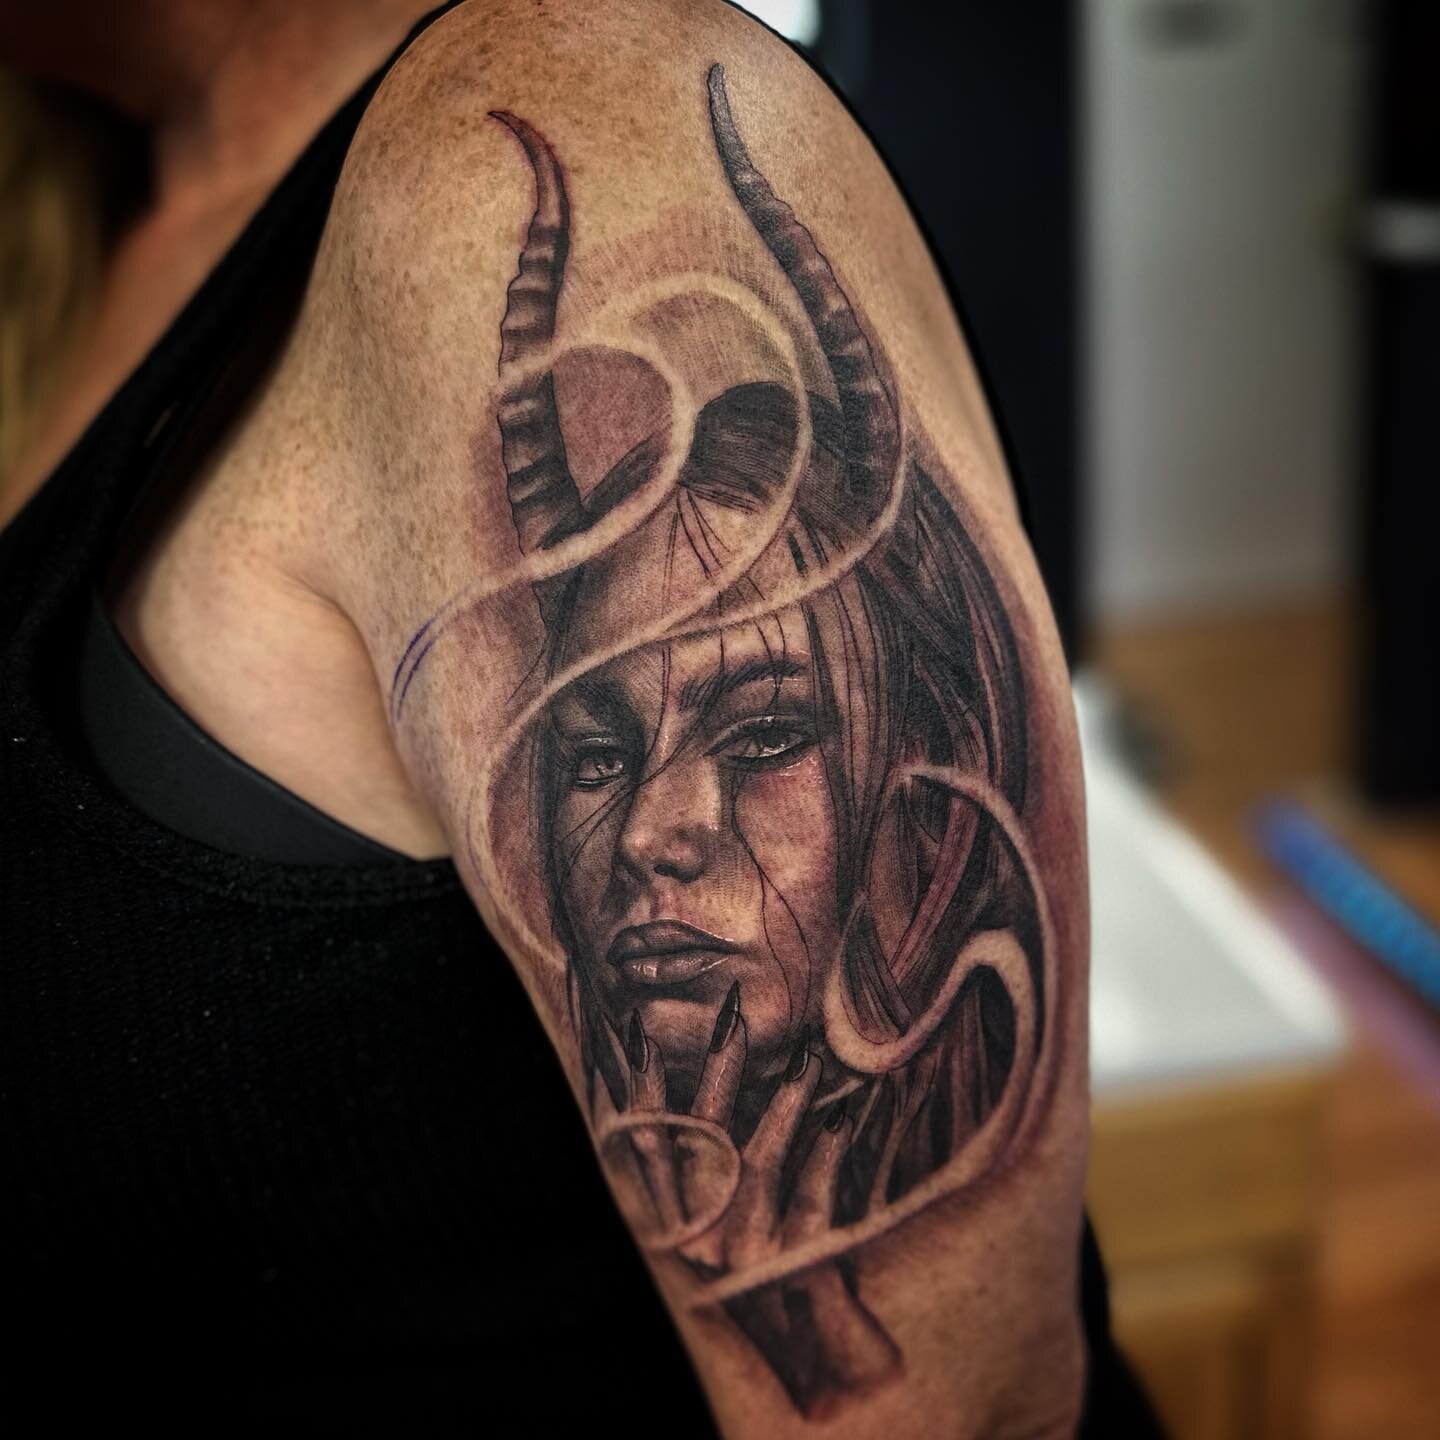 Done by @rockemtatts Now booking for June 

Click link in bio for more information on how to book an appointment 

Losttribestattoosva.com 🧑&zwj;💻
Shop phone (540)376-7456 📲

#customtattoos #Bishoprotary  #blackandgray#tattooloverscare #sleevetatt